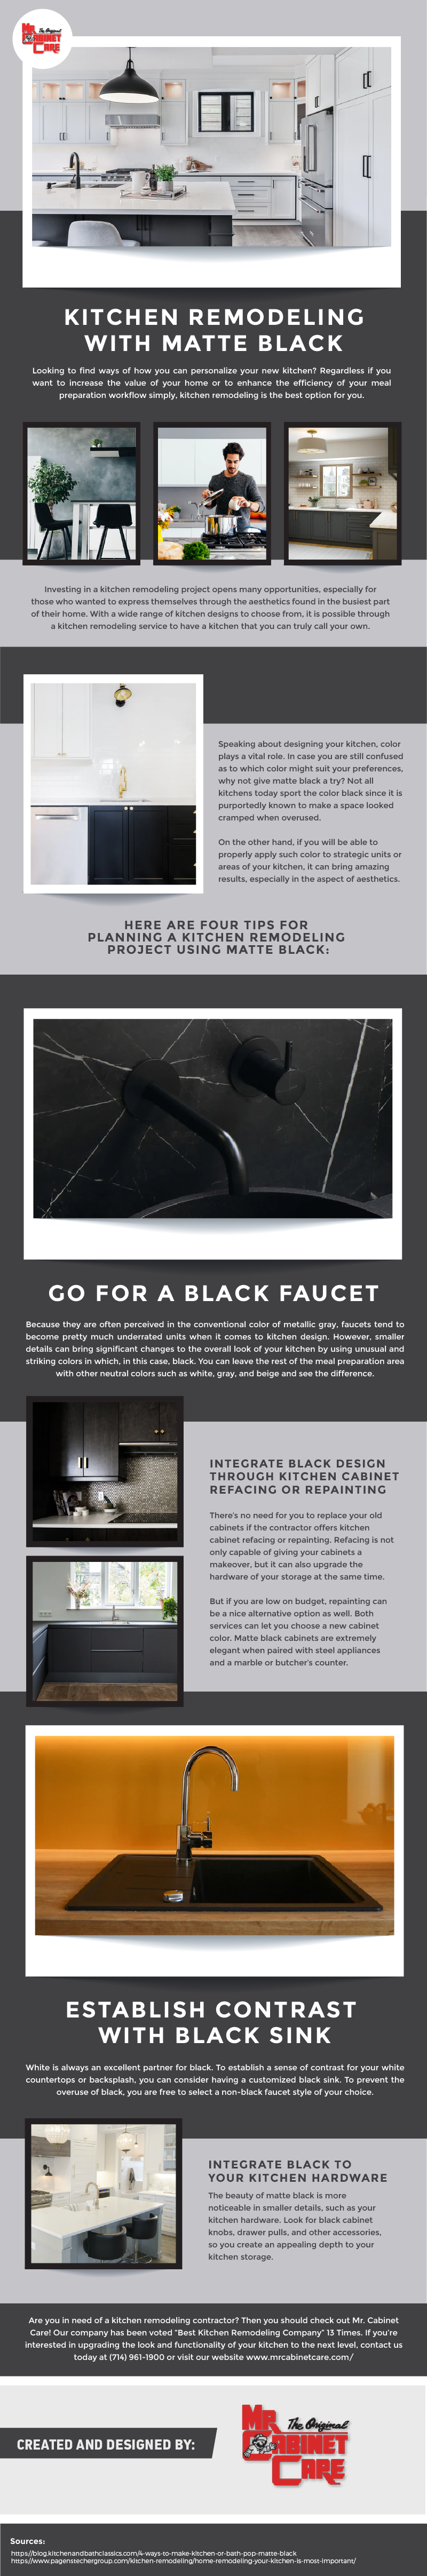 Kitchen Remodeling with Matte Black - Infographic